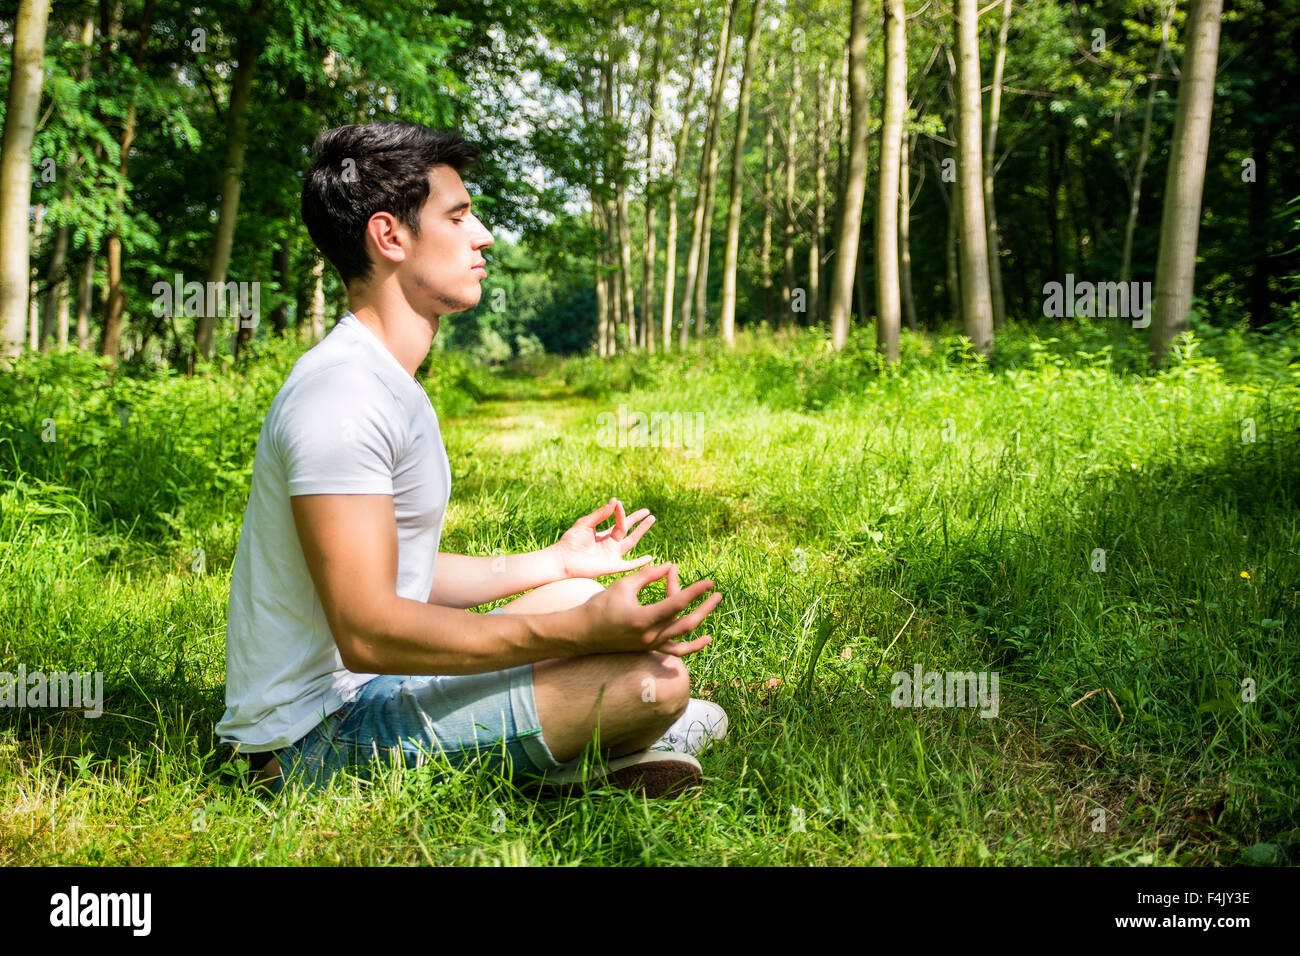 Profile of handsome Young Man During Meditation or Doing an Outdoor Yoga Exercise Sitting Cross Legged on Grassy Ground Alone in Stock Photo